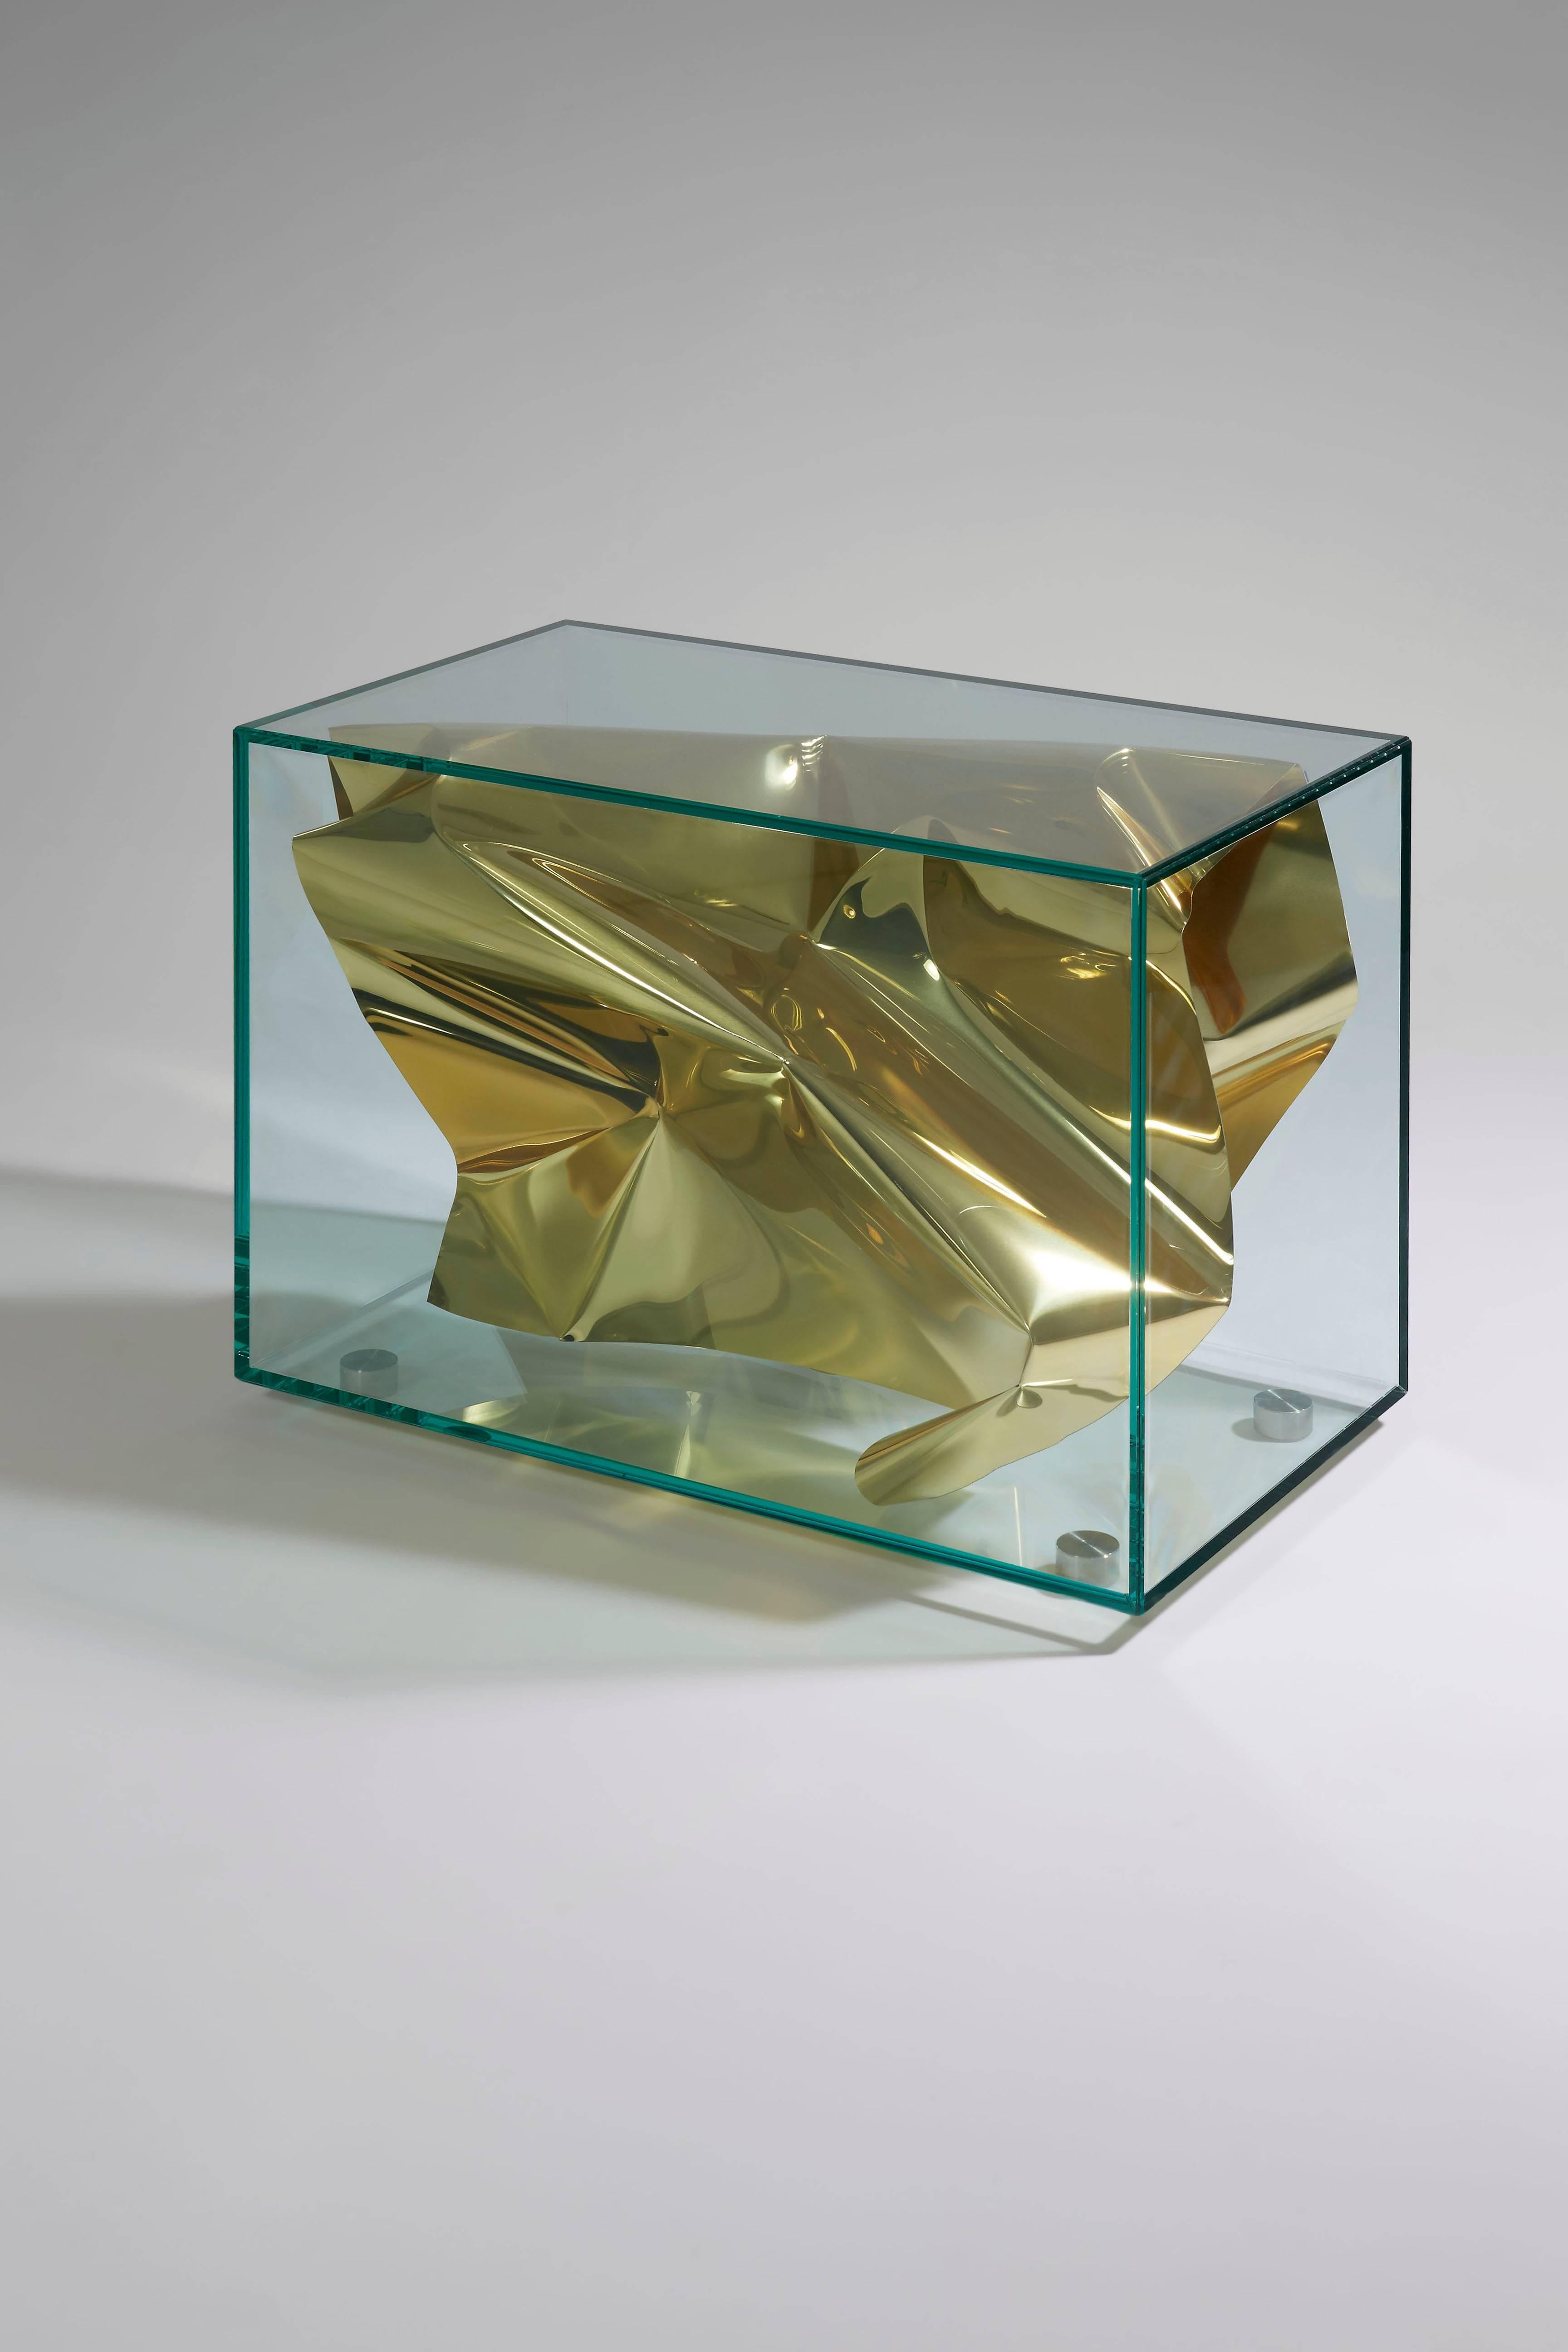 Fredrikson Stallard
Side Table 'Crush'
2012.
Glass, stainless steel, colored gold polished aluminum / polished aluminum.
Measures: H 52 x L 40 x D 70 cm / H 20.5 x L 15.7 x D 27.6 in.
Editions David Gill, limited to 30 + 2P + 2AP.
For EU buyers this